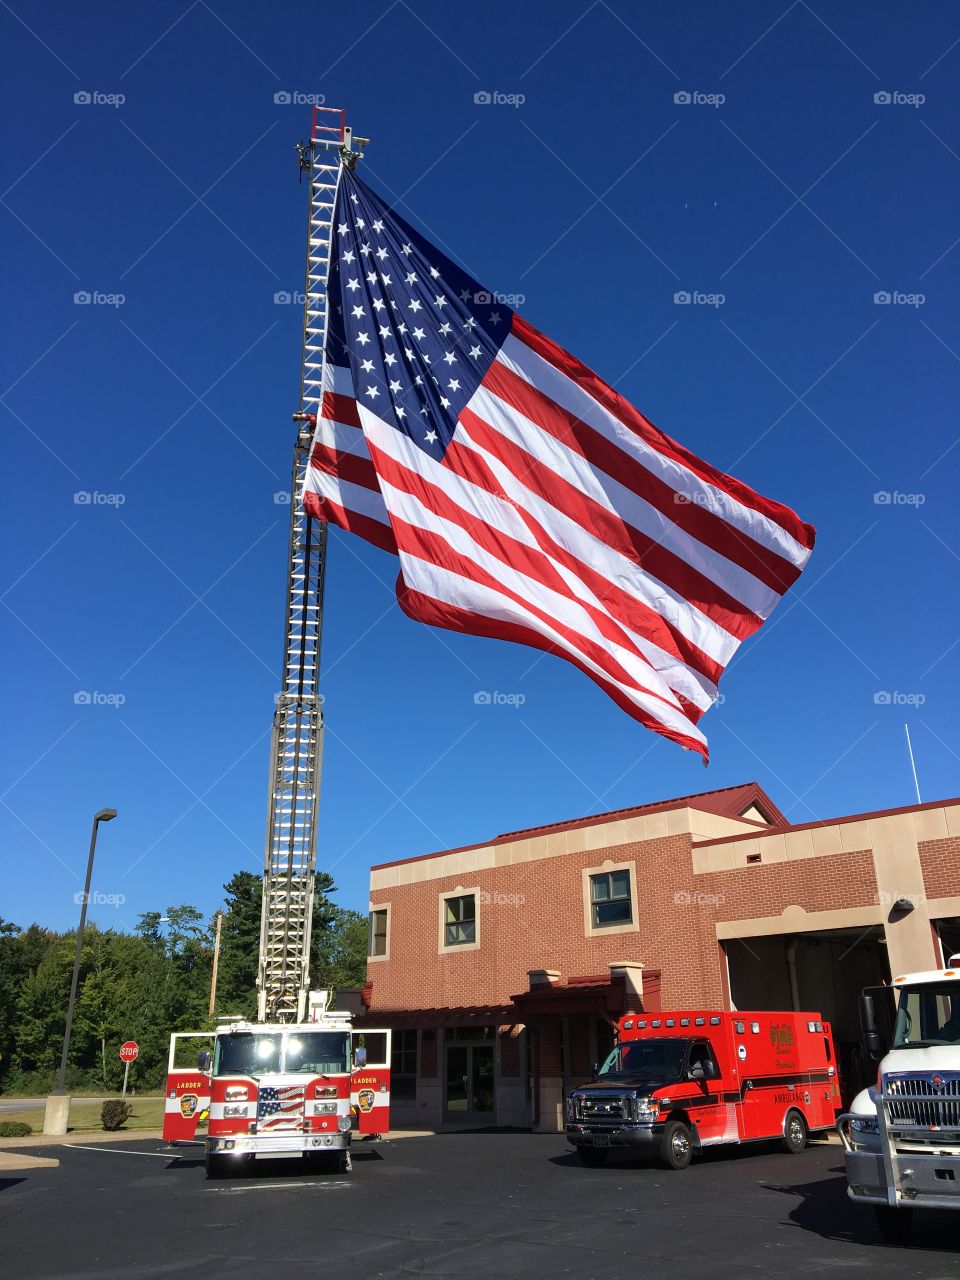 US flag and fire truck